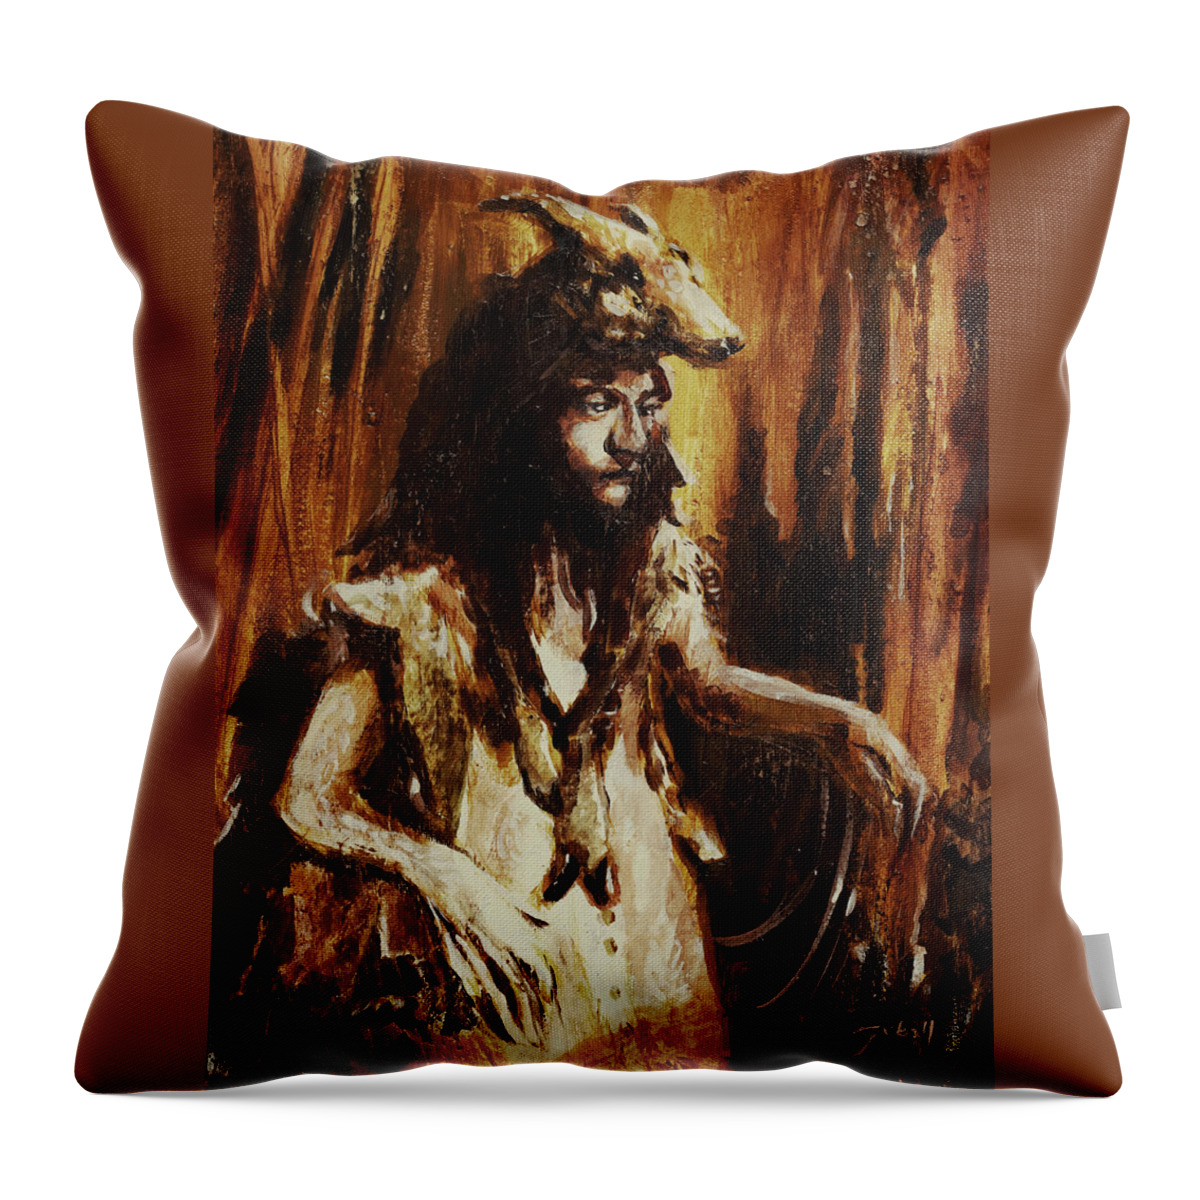 Girl Throw Pillow featuring the painting The Young Witch by Sv Bell